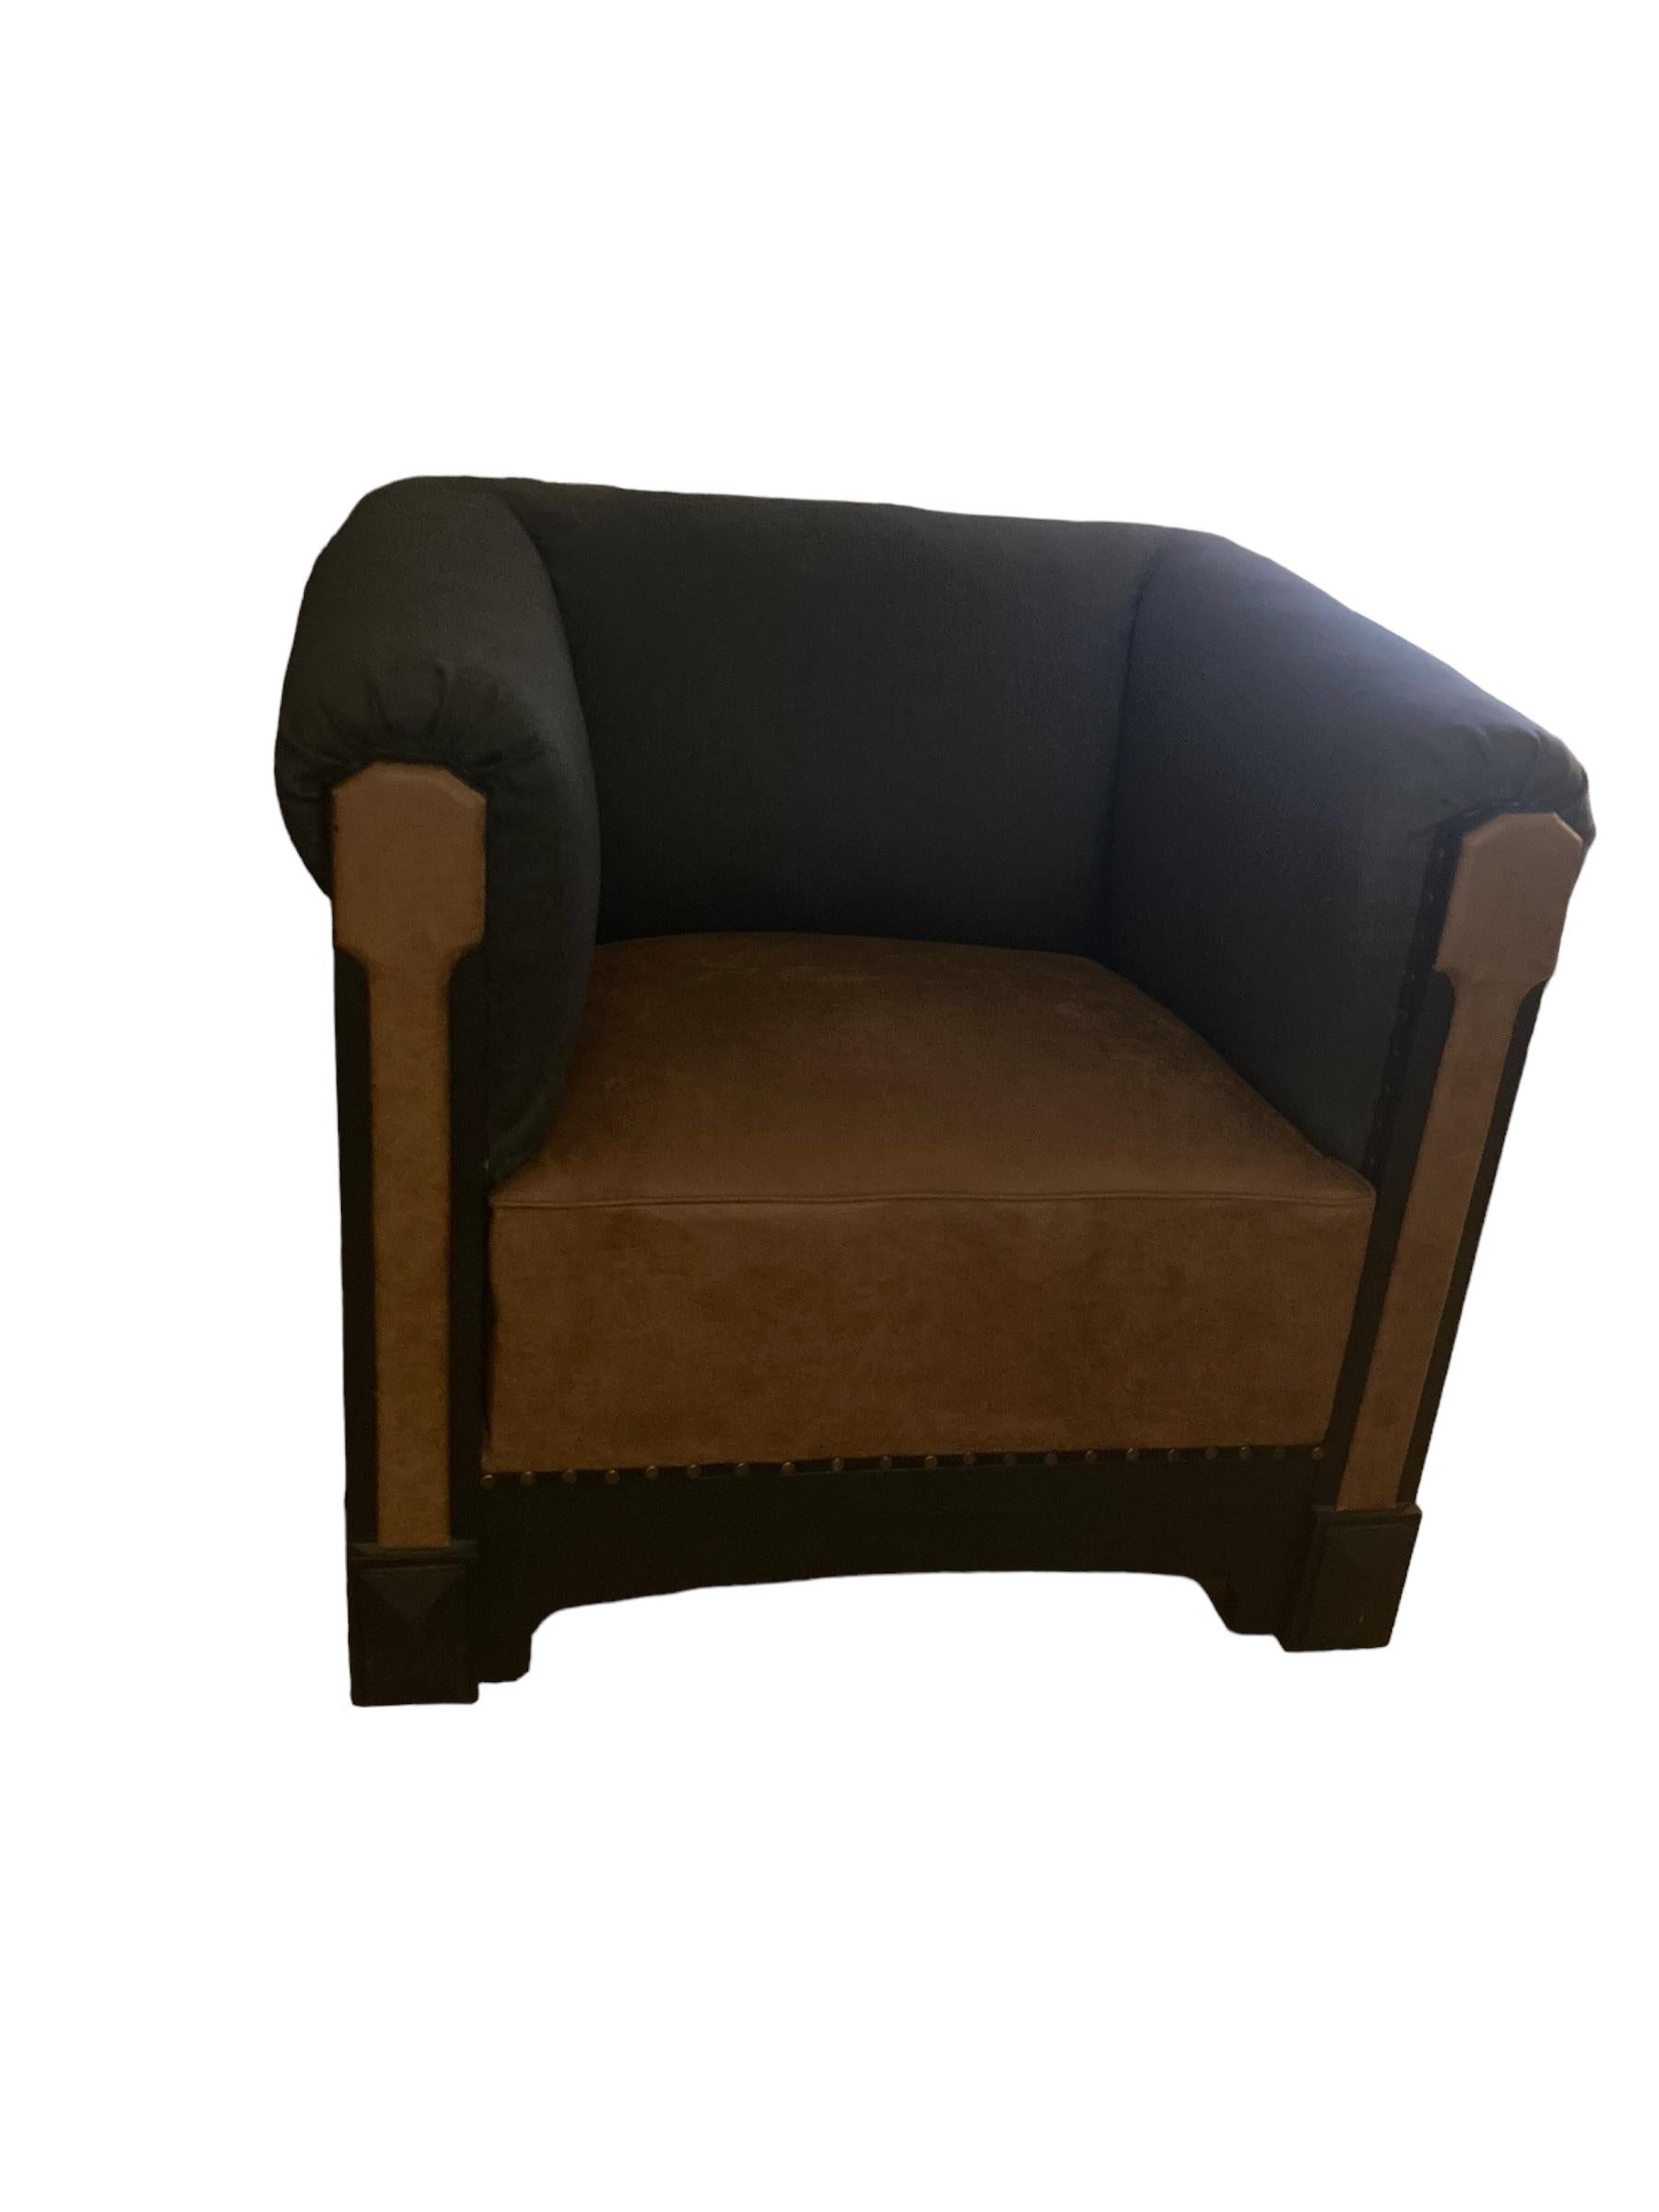 20th Century French Art Deco Reupholstered Club Chair For Sale